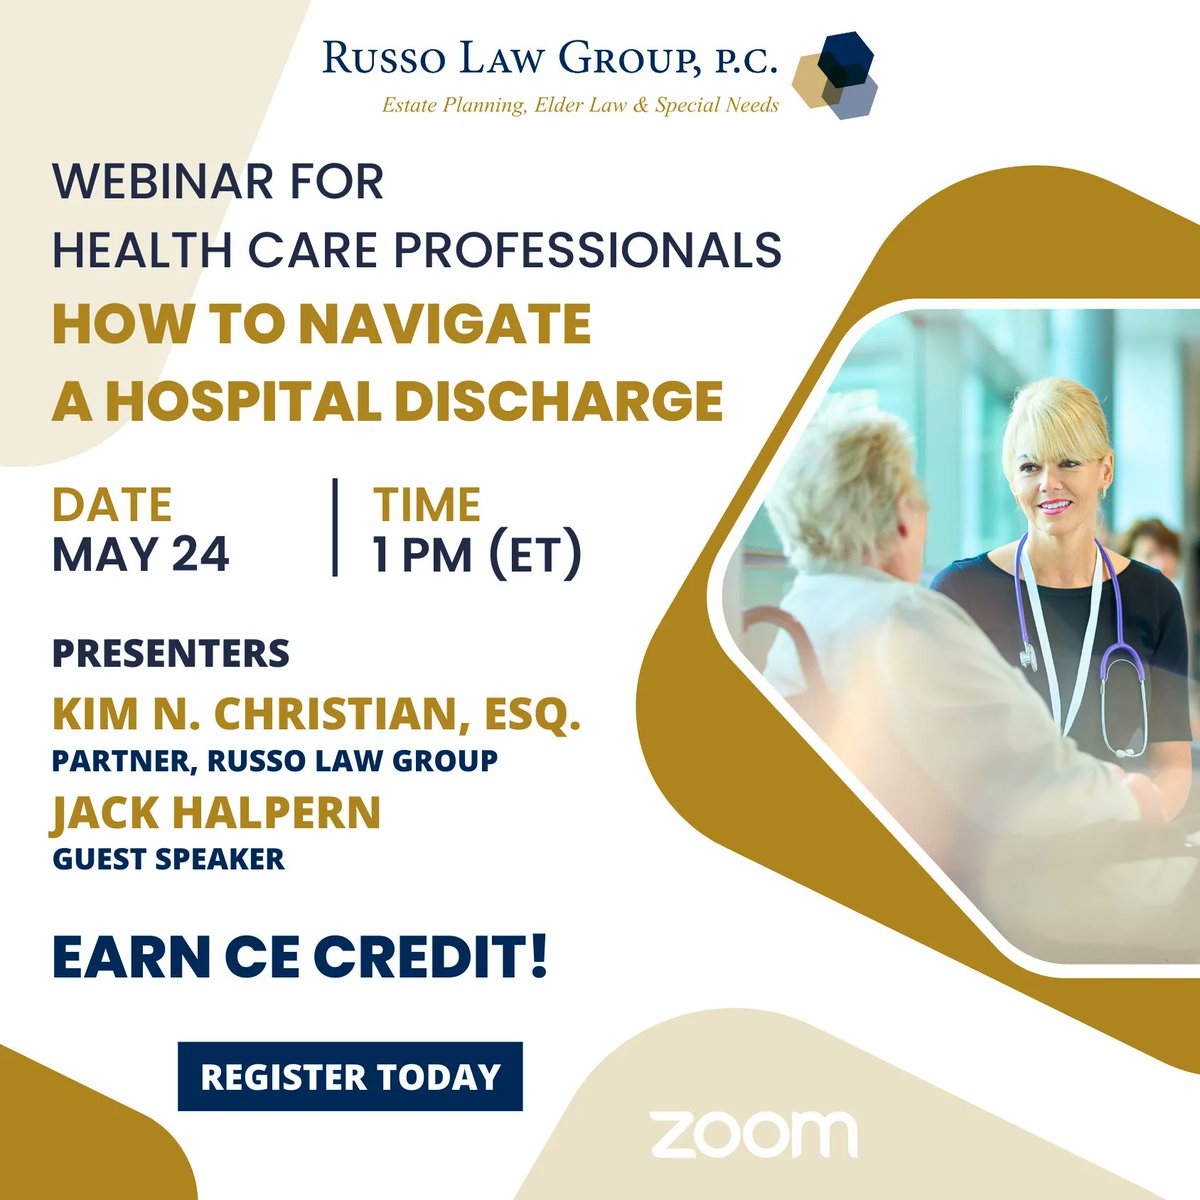 Join Kim Christian, Esq. & Jack Halpern, Elder Care Advocate, next Wed for their webinar “How to Navigate a Hospital Discharge”. Register to attend, learn, & earn CE credit: buff.ly/3VqT1BB  #russolawgroup #healthcareprofessionals #webinar #cecredit #hospitaldischarge